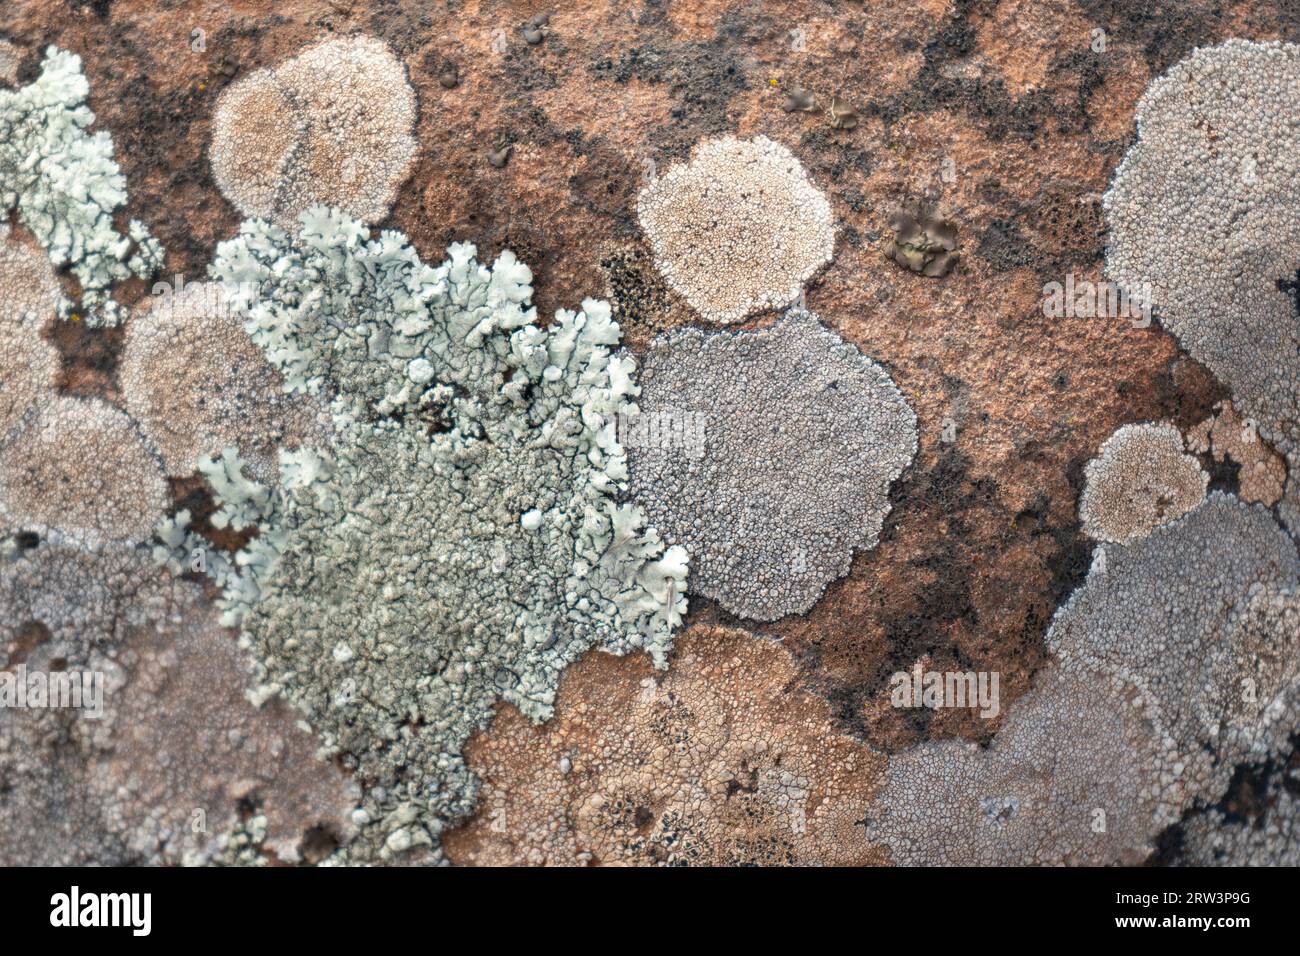 Close up of various lichen growing on stone. Stock Photo